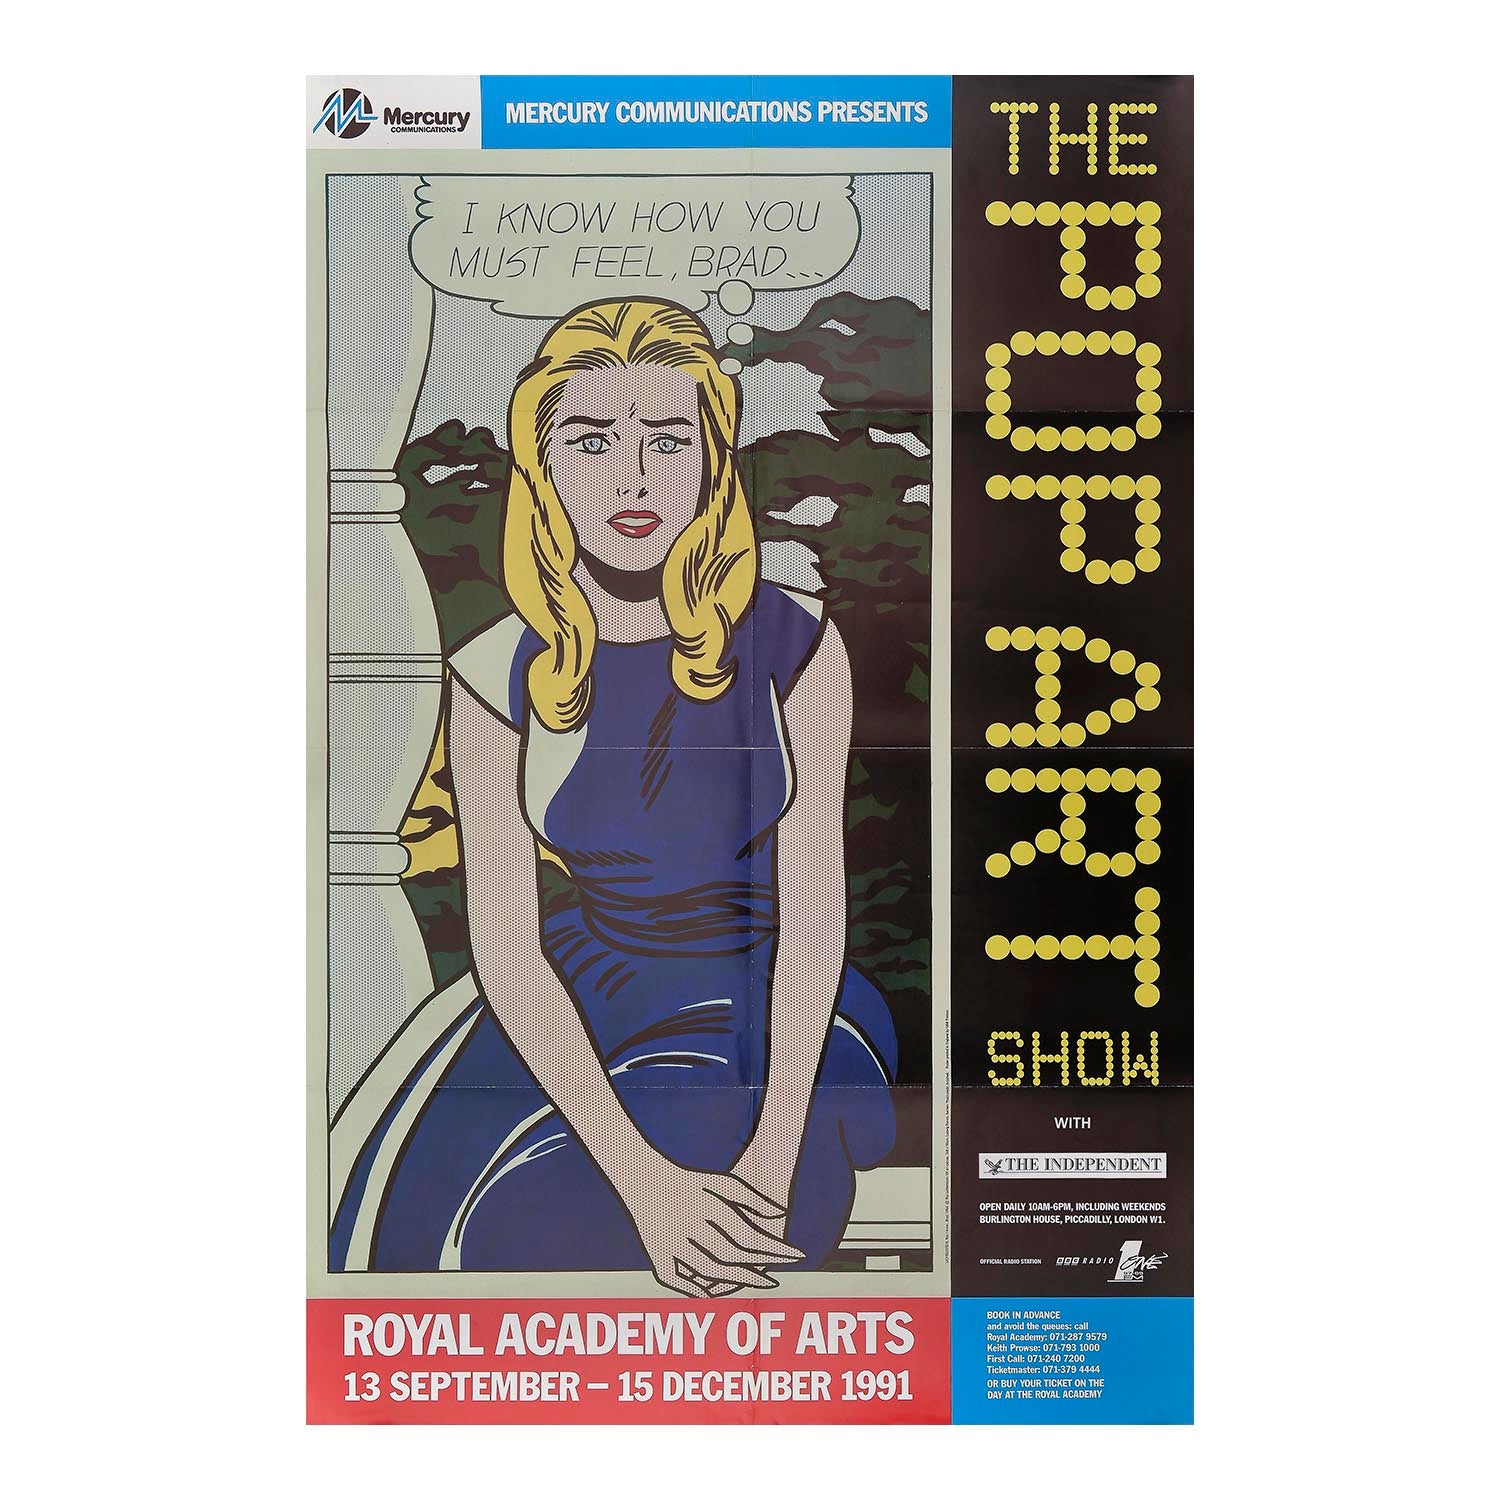 Original art exhibition poster, The Pop Art Show, held at the Royal Academy of Arts, 1991. The design features I know how you must feel, Brad (1963), by the American Pop Artist Roy Lichtenstein.